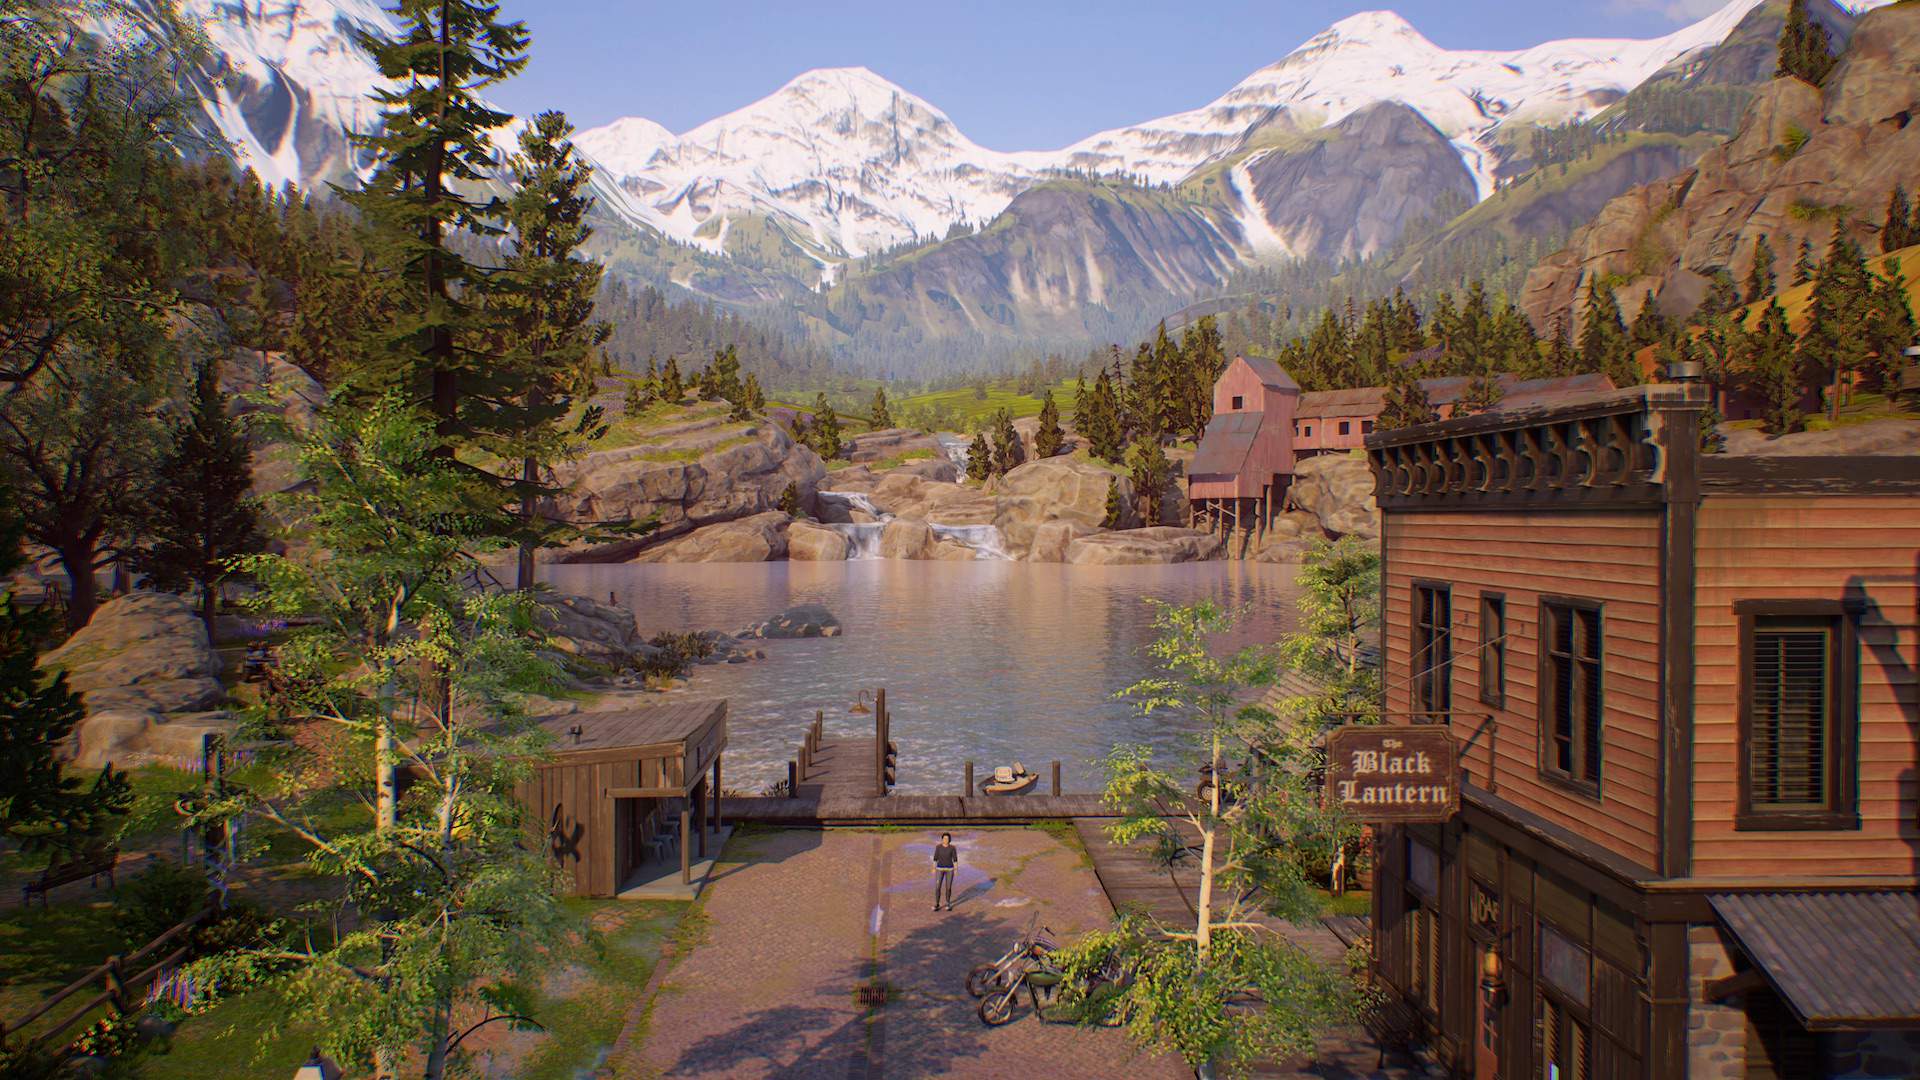 Life Is Strange: True Colors' players can join LARP sessions with